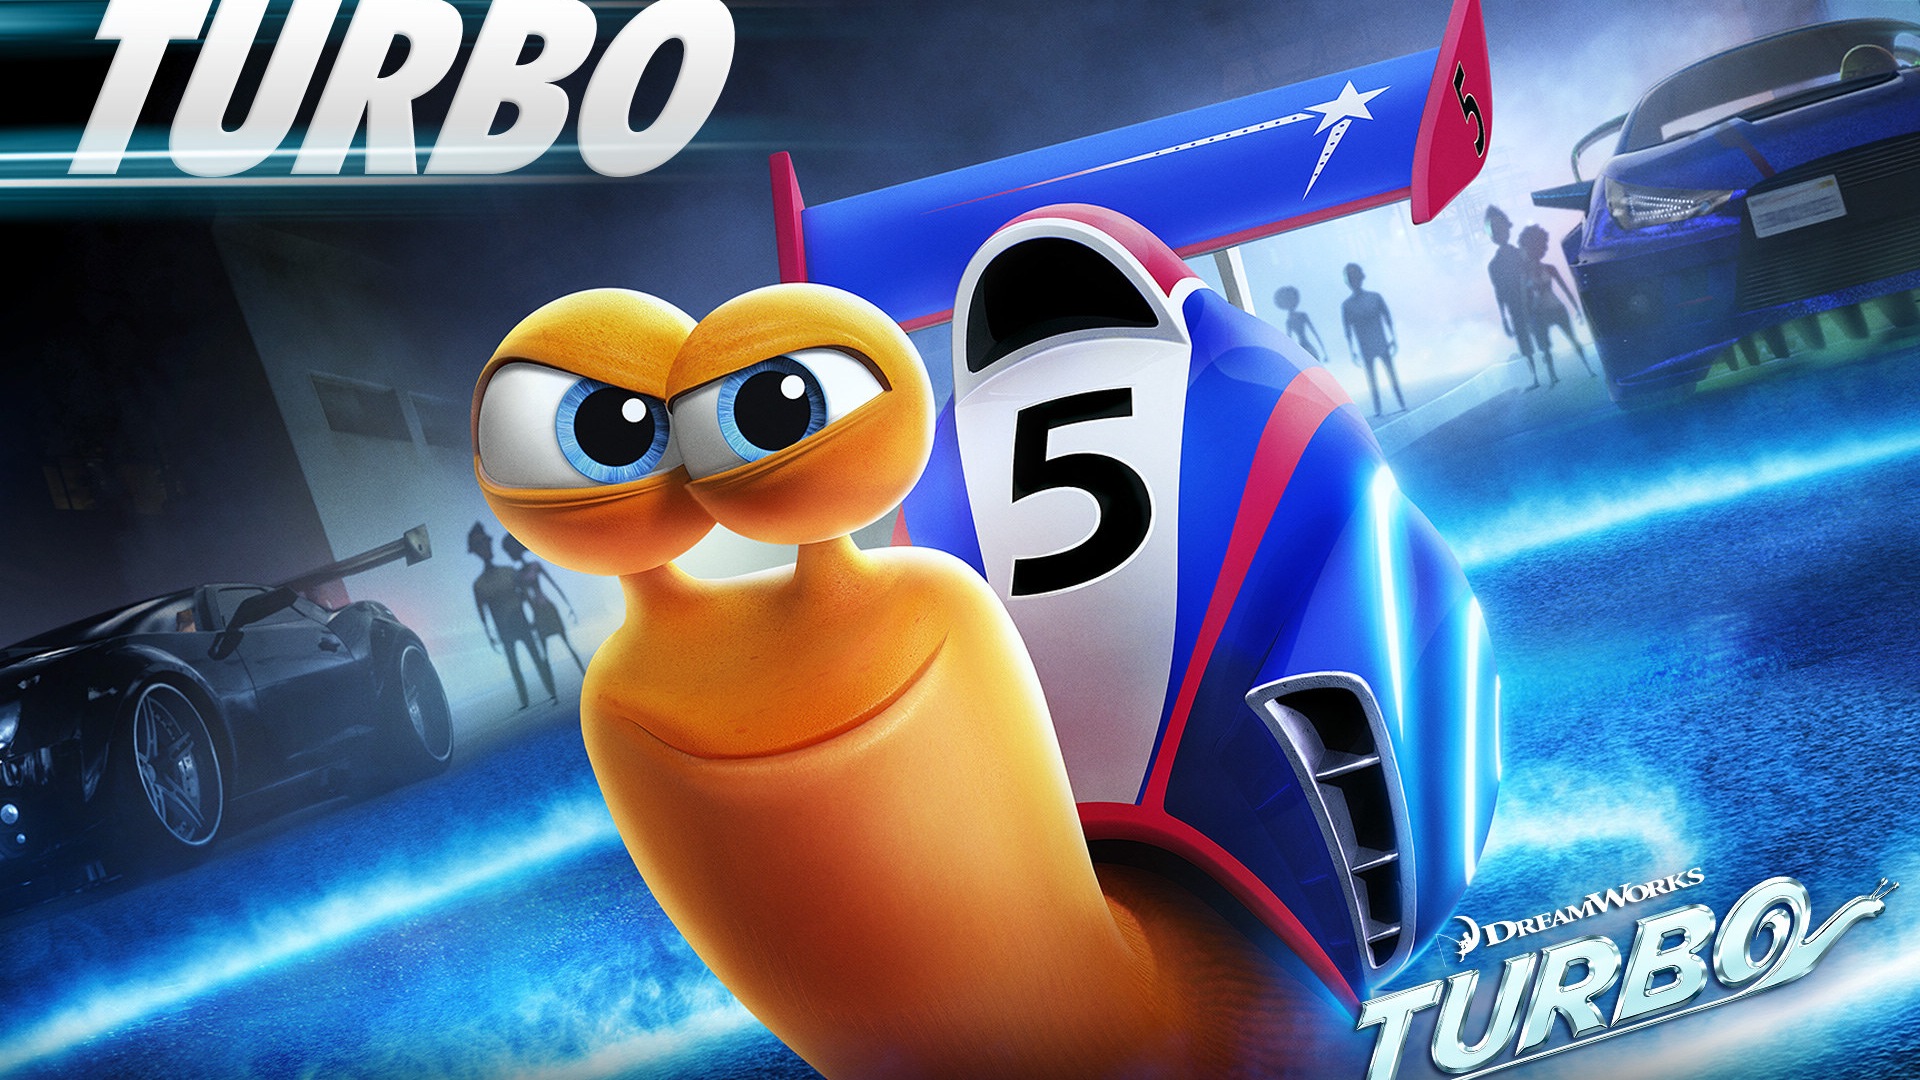 Turbo 3D movie HD wallpapers #9 - 1920x1080